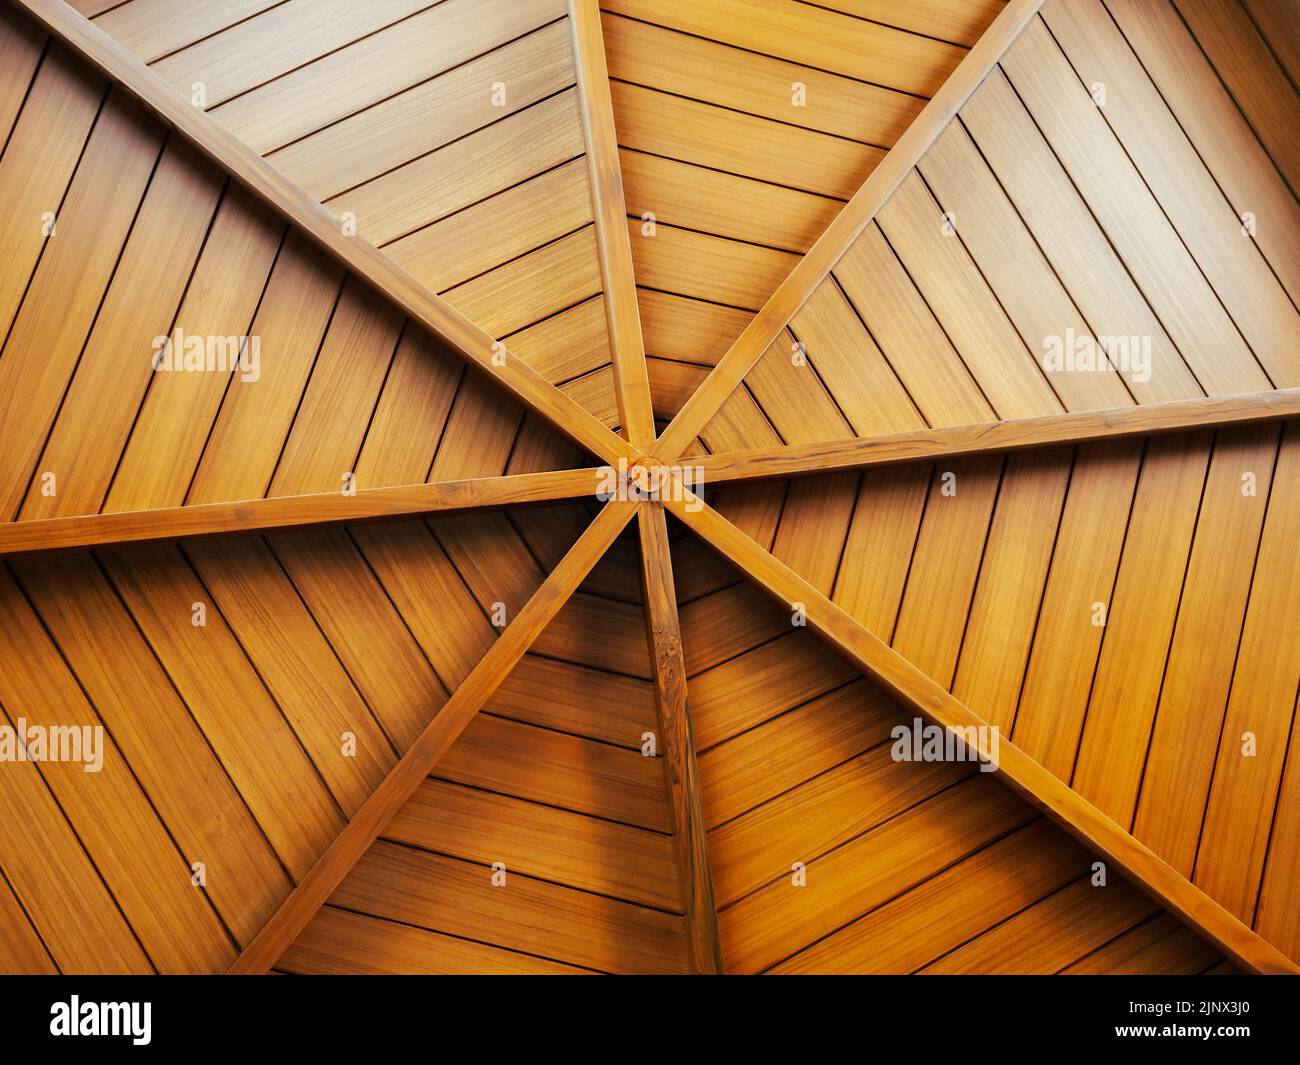 Wooden construction background, arranged to round shape, under the roof. Interior structure of a domed wood plank ceiling, circle pattern, spider web Stock Photo